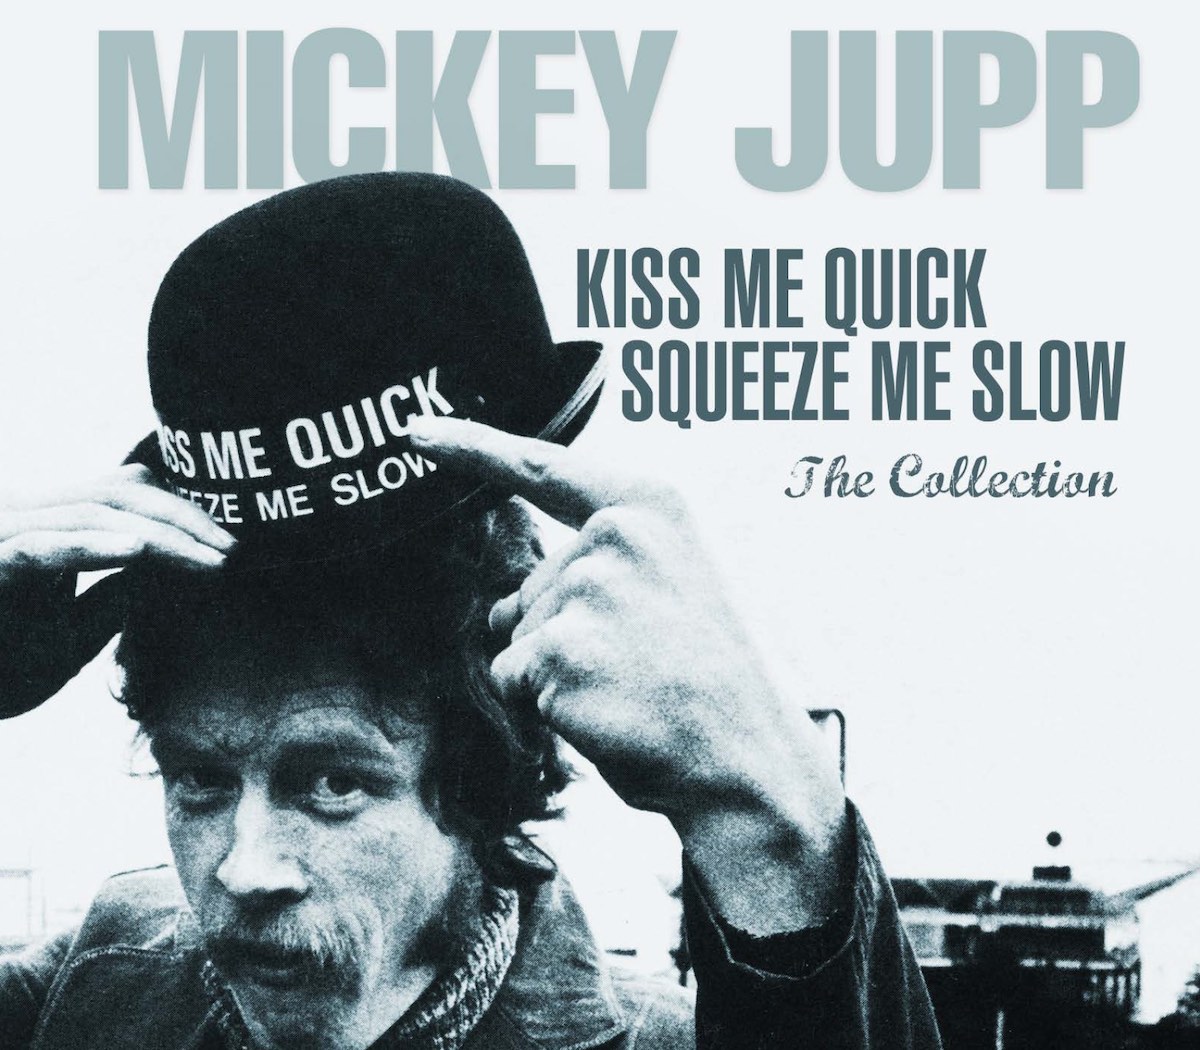 Mickey Jupp – Kiss Me Quick, Squeeze Me Slow – The Collection